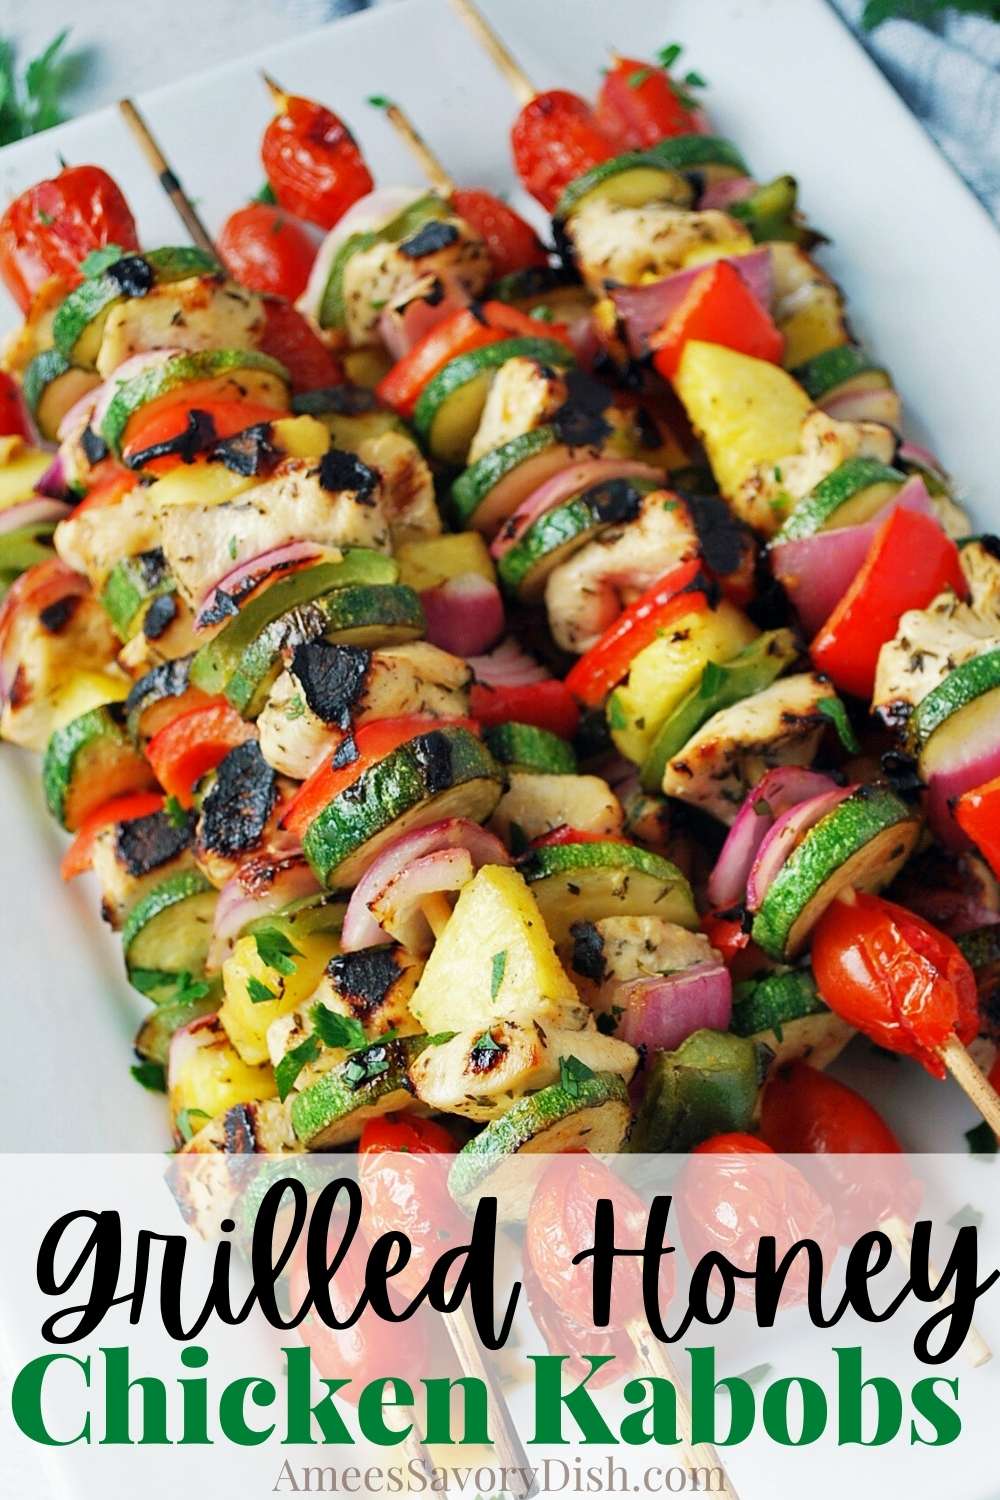 This easy and flavorful recipe for Grilled Honey Chicken Kabobs is the perfect way to enjoy healthy grilled chicken and vegetables! via @Ameessavorydish